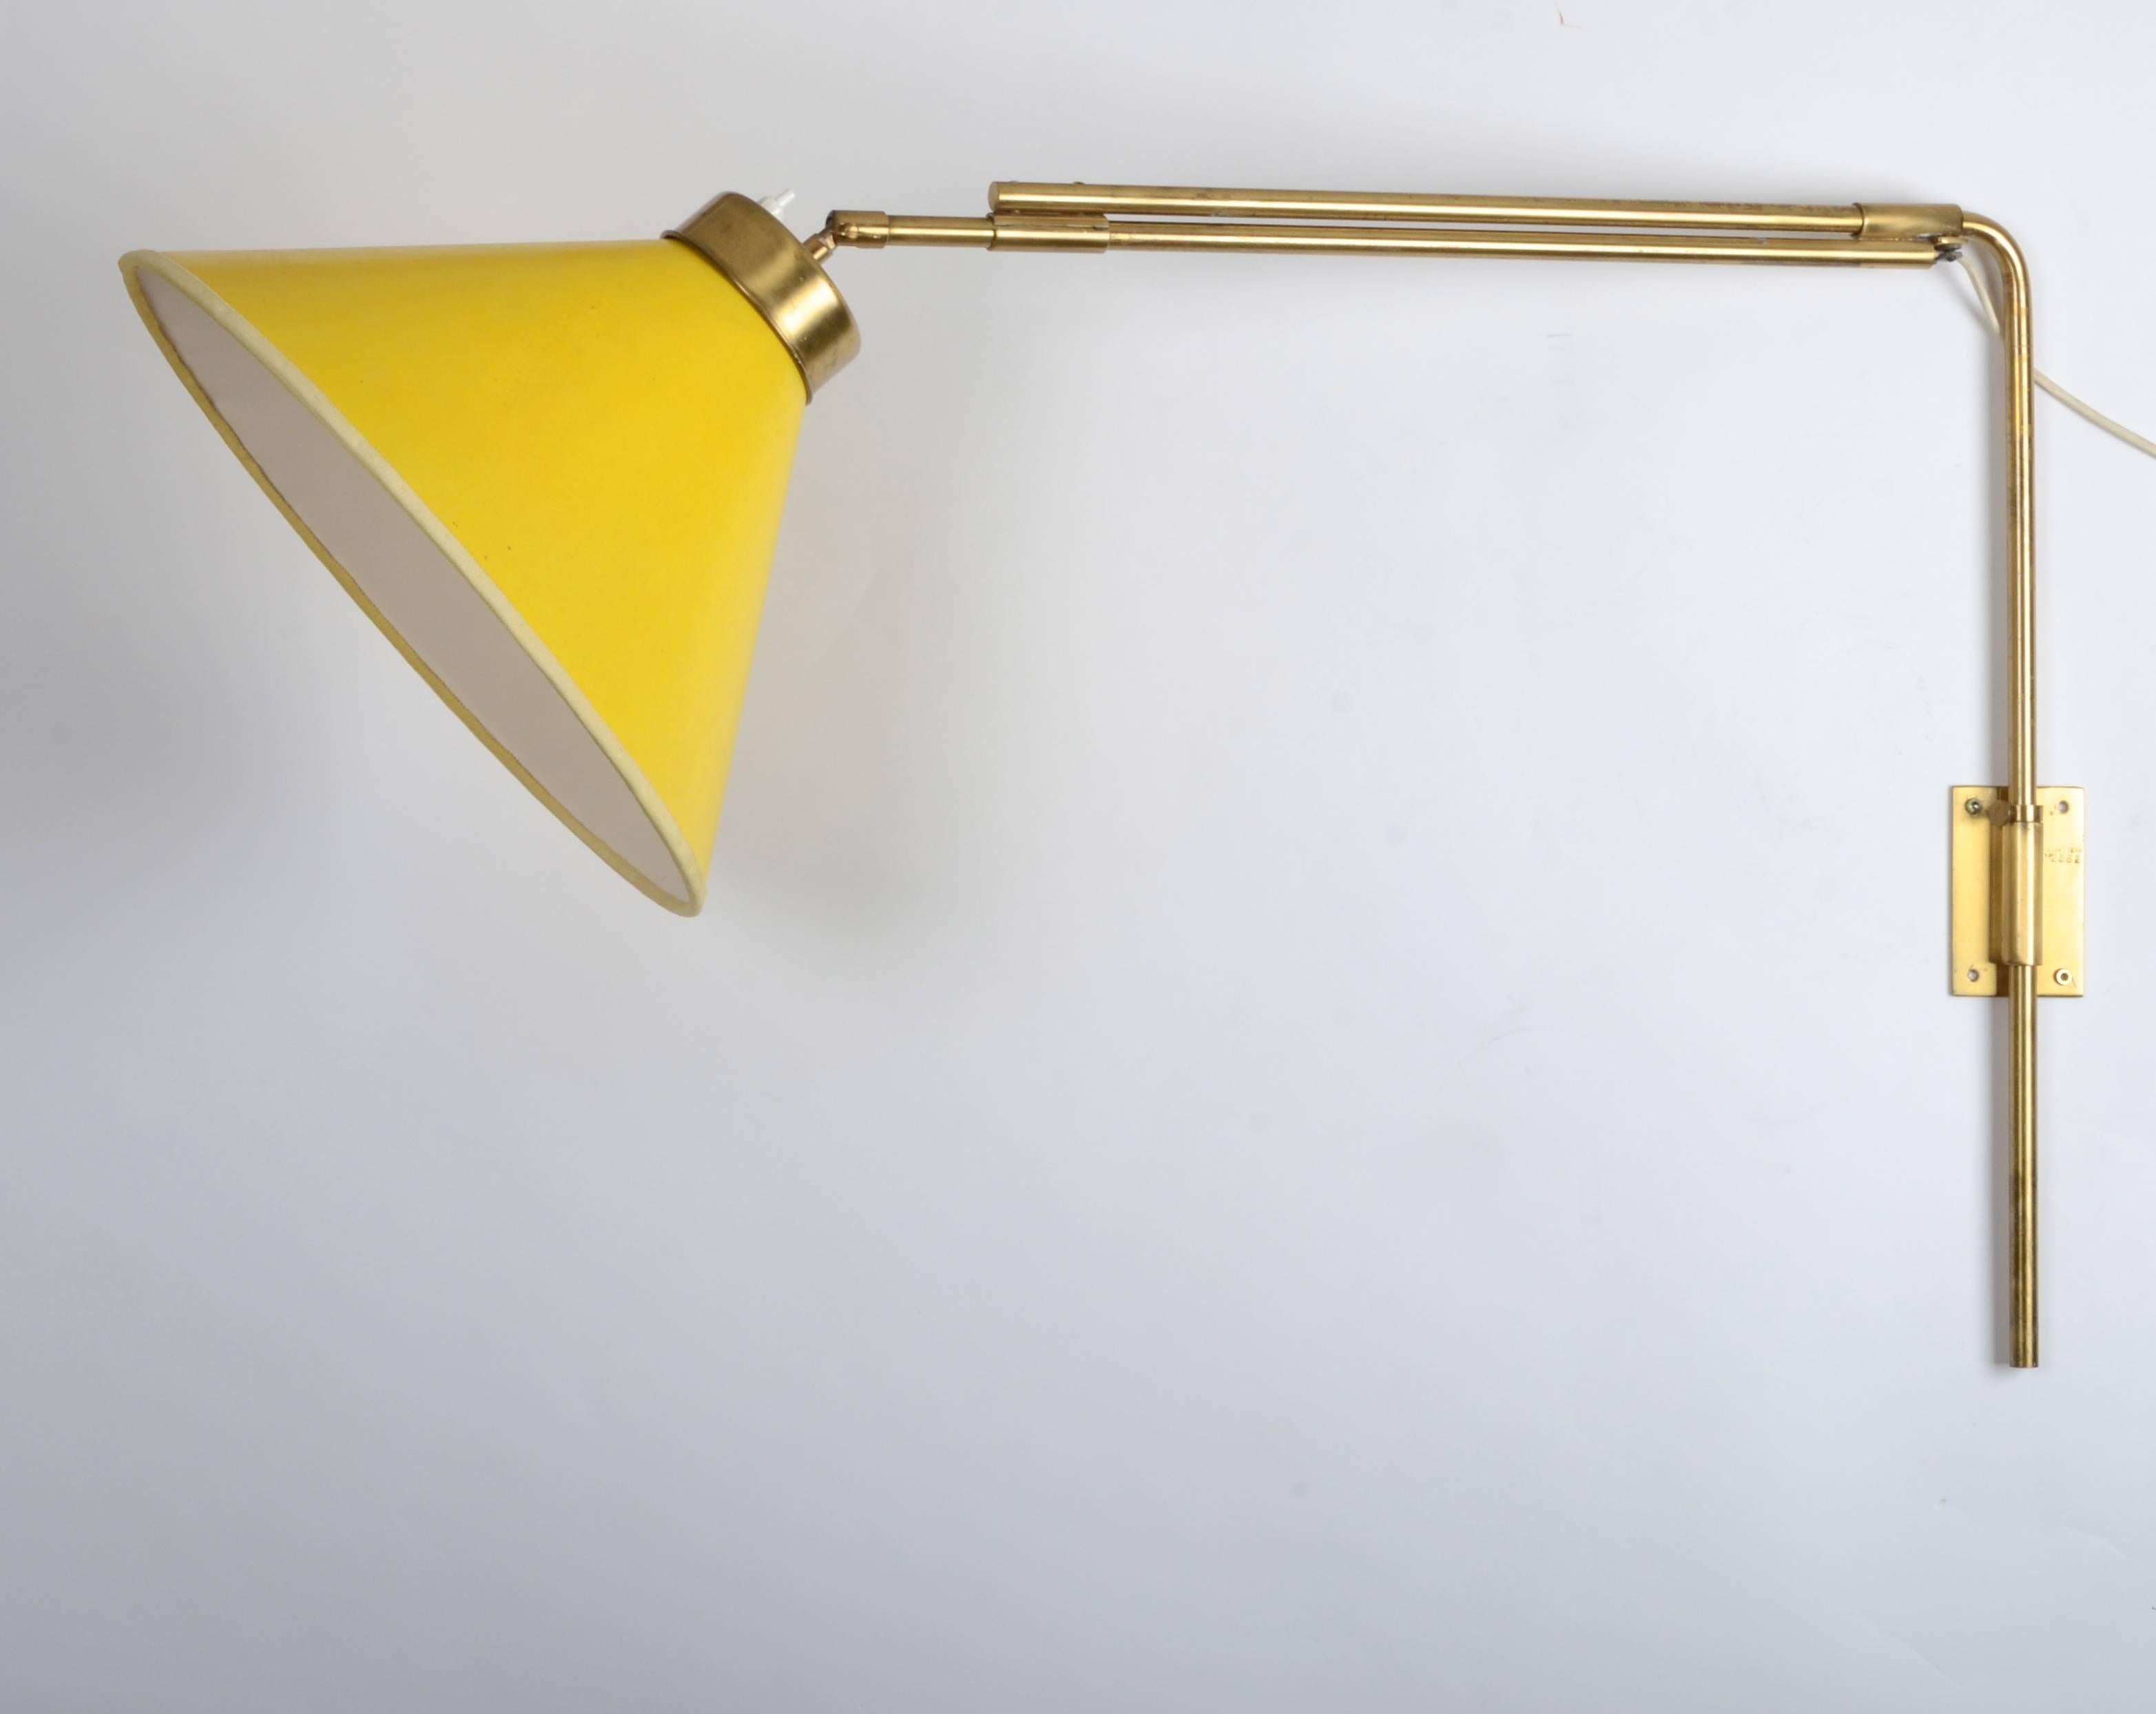 Wall lamp in brass, model 2582. Designed by Josef Frank for Firma Svenskt Tenn, mid-1900s. Adjustable length and height.